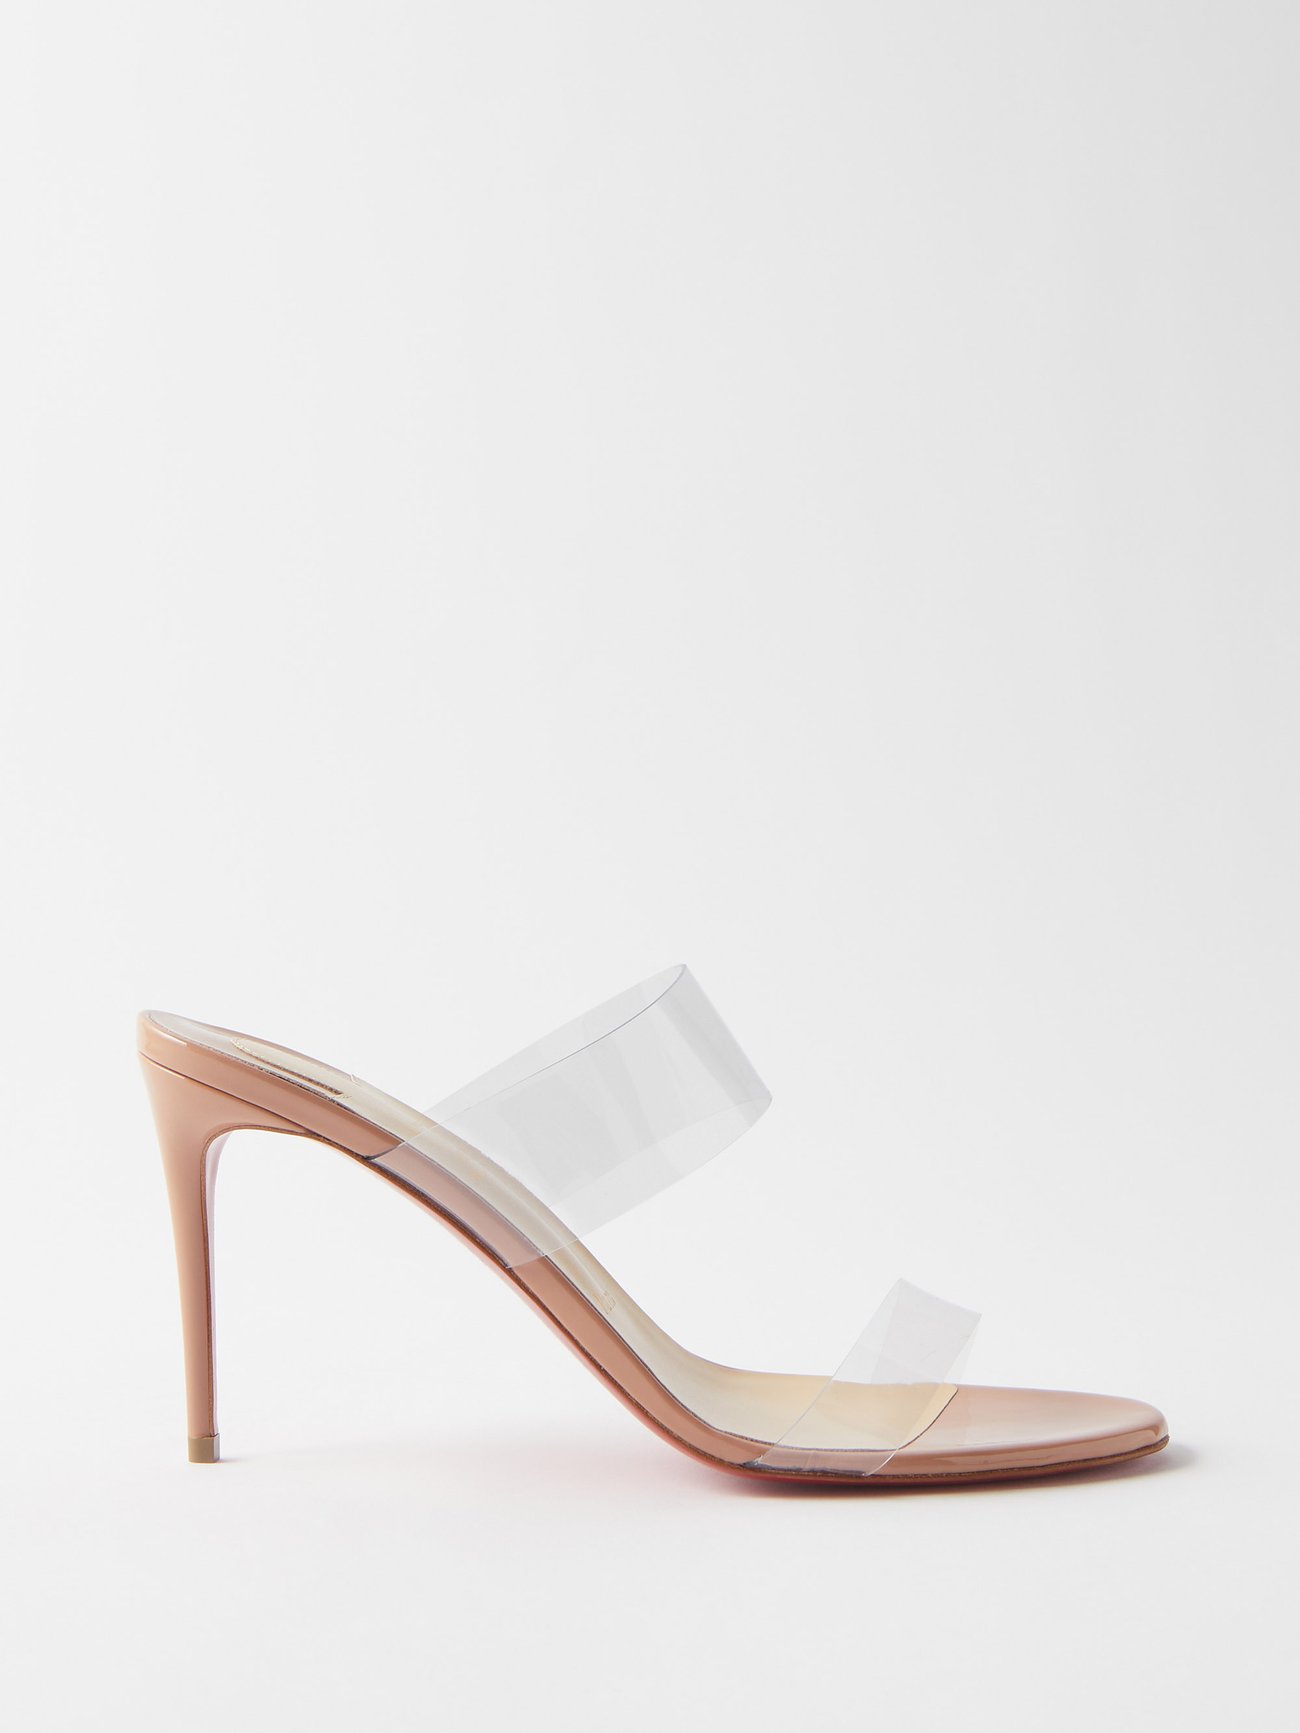 Beige Just Nothing 85 PVC and patent-leather mules | Christian ...